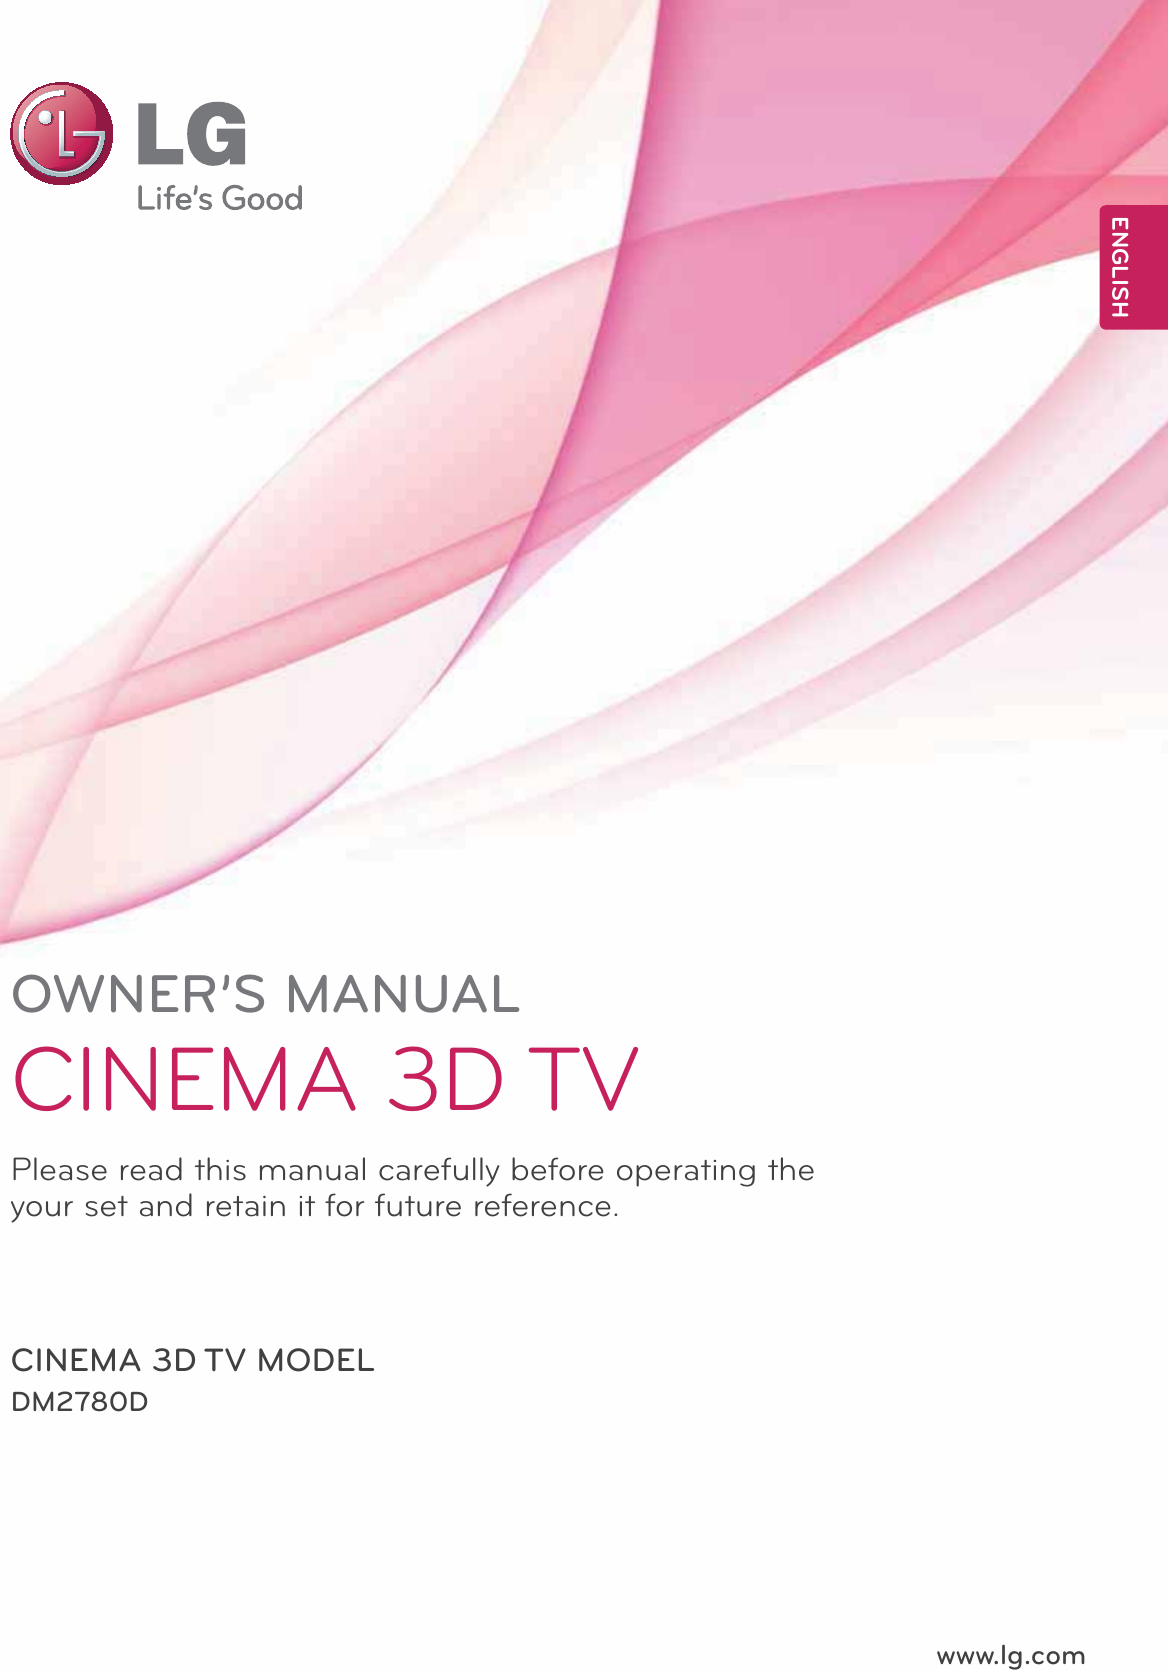 www.lg.comOWNER’S MANUALCINEMA 3D TVDM2780DPlease read this manual carefully before operating the your set and retain it for future reference.CINEMA 3D TV MODELENGLISH